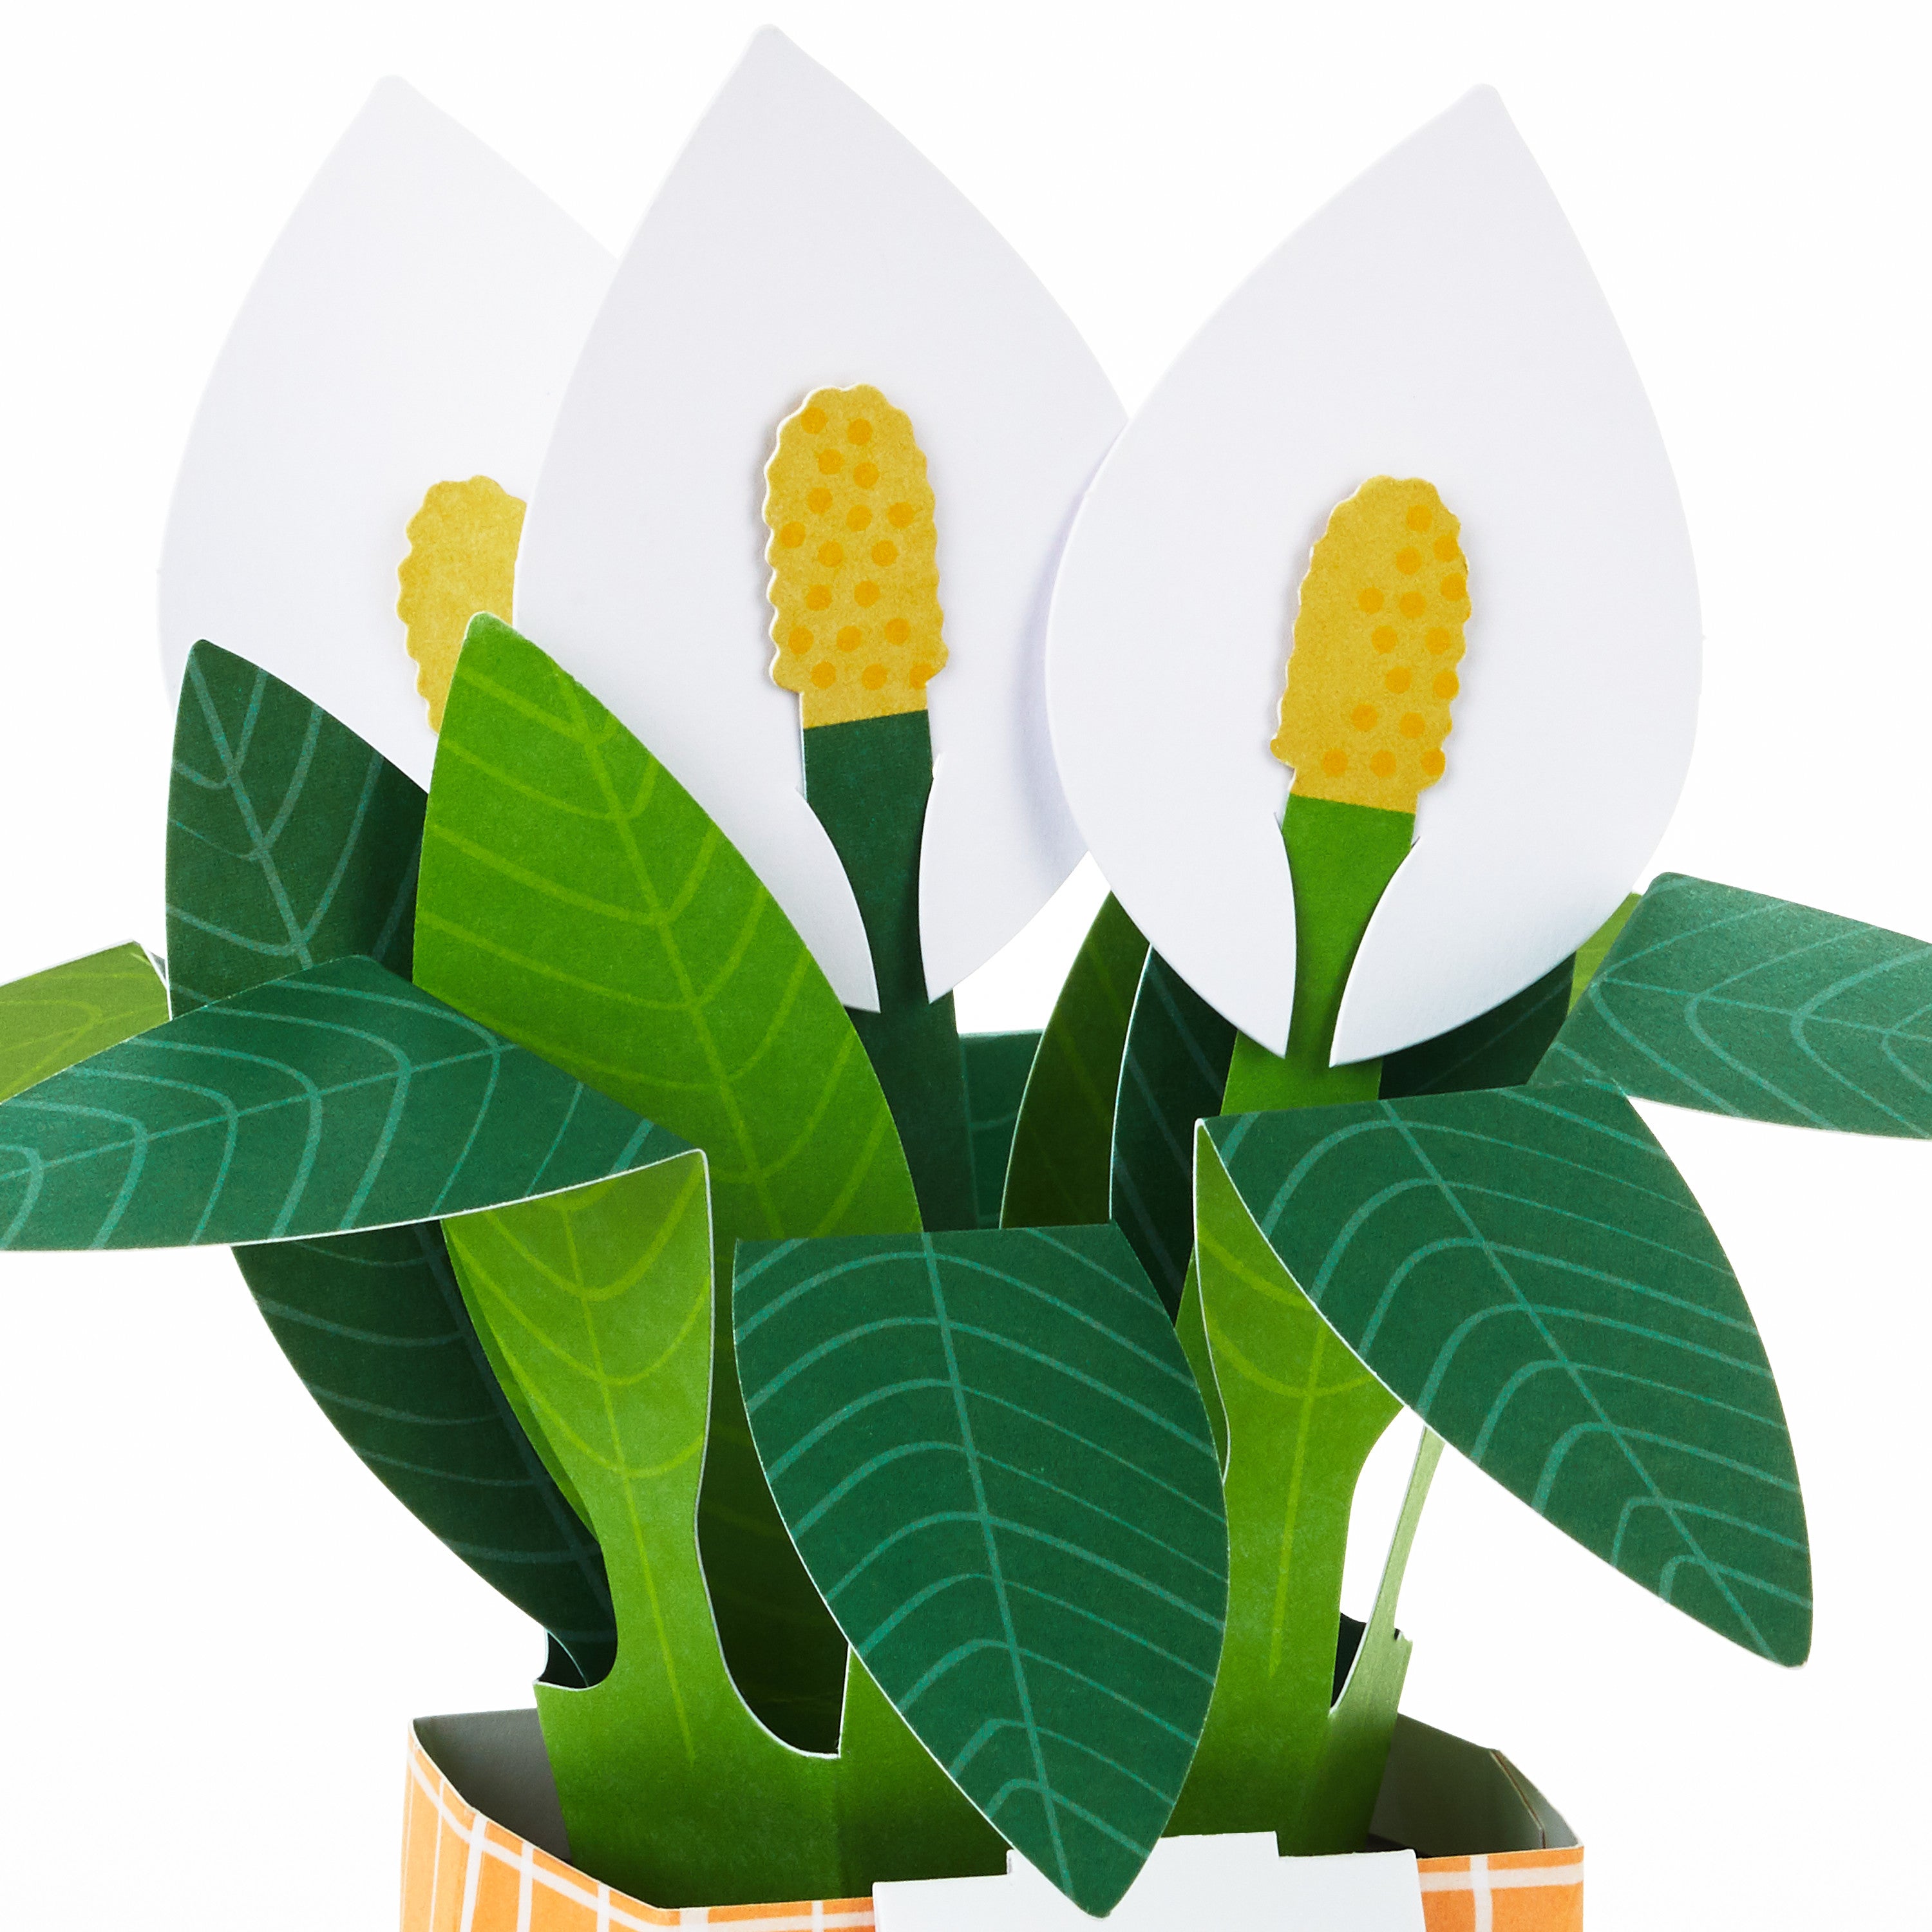  Paper Wonder Thinking of You, Encouragement Pop Up Card (Potted Peace Lily)